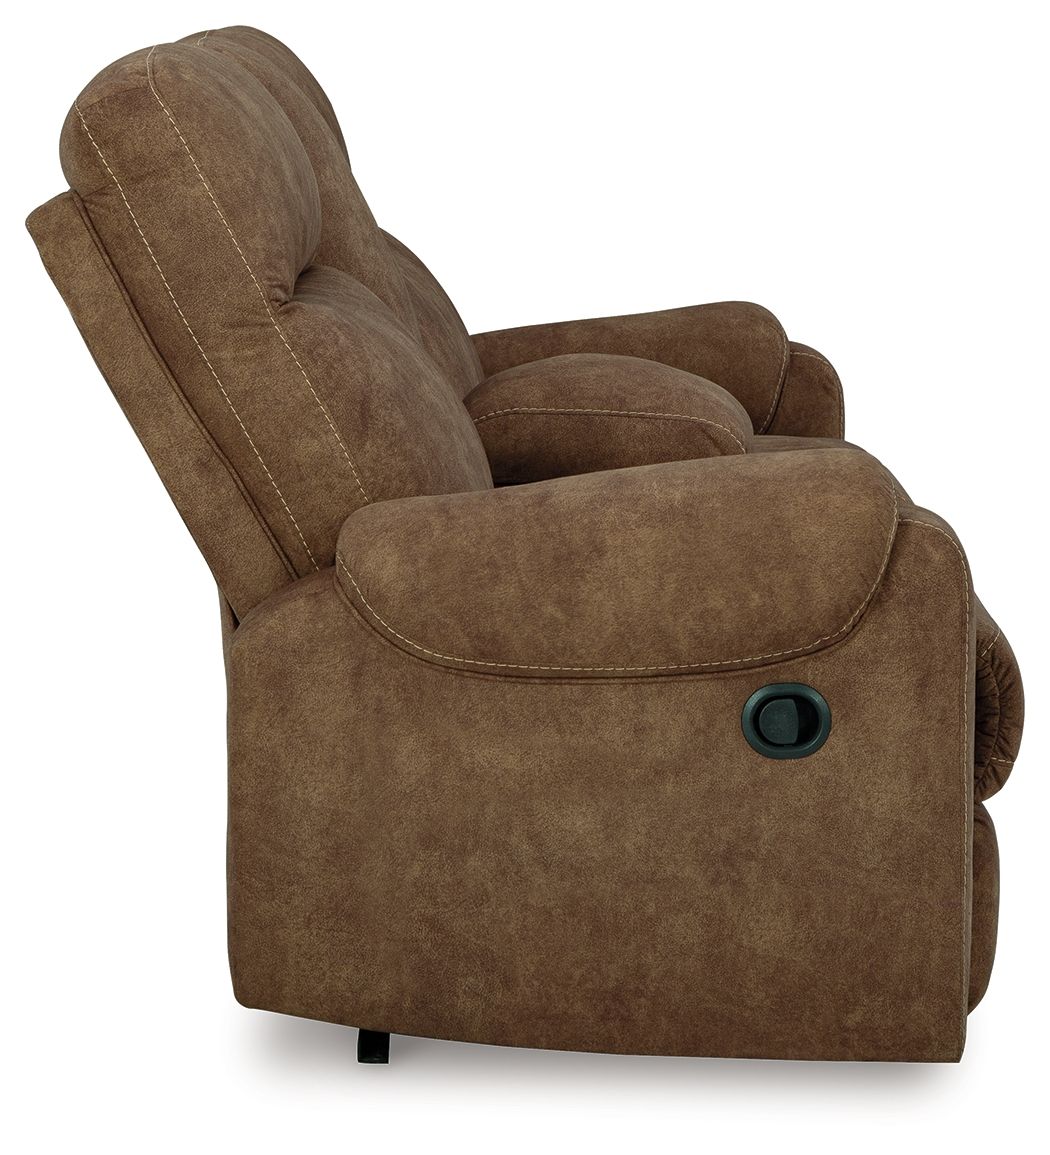 Edenwold - Brindle - Dbl Reclining Loveseat With Console - Tony's Home Furnishings